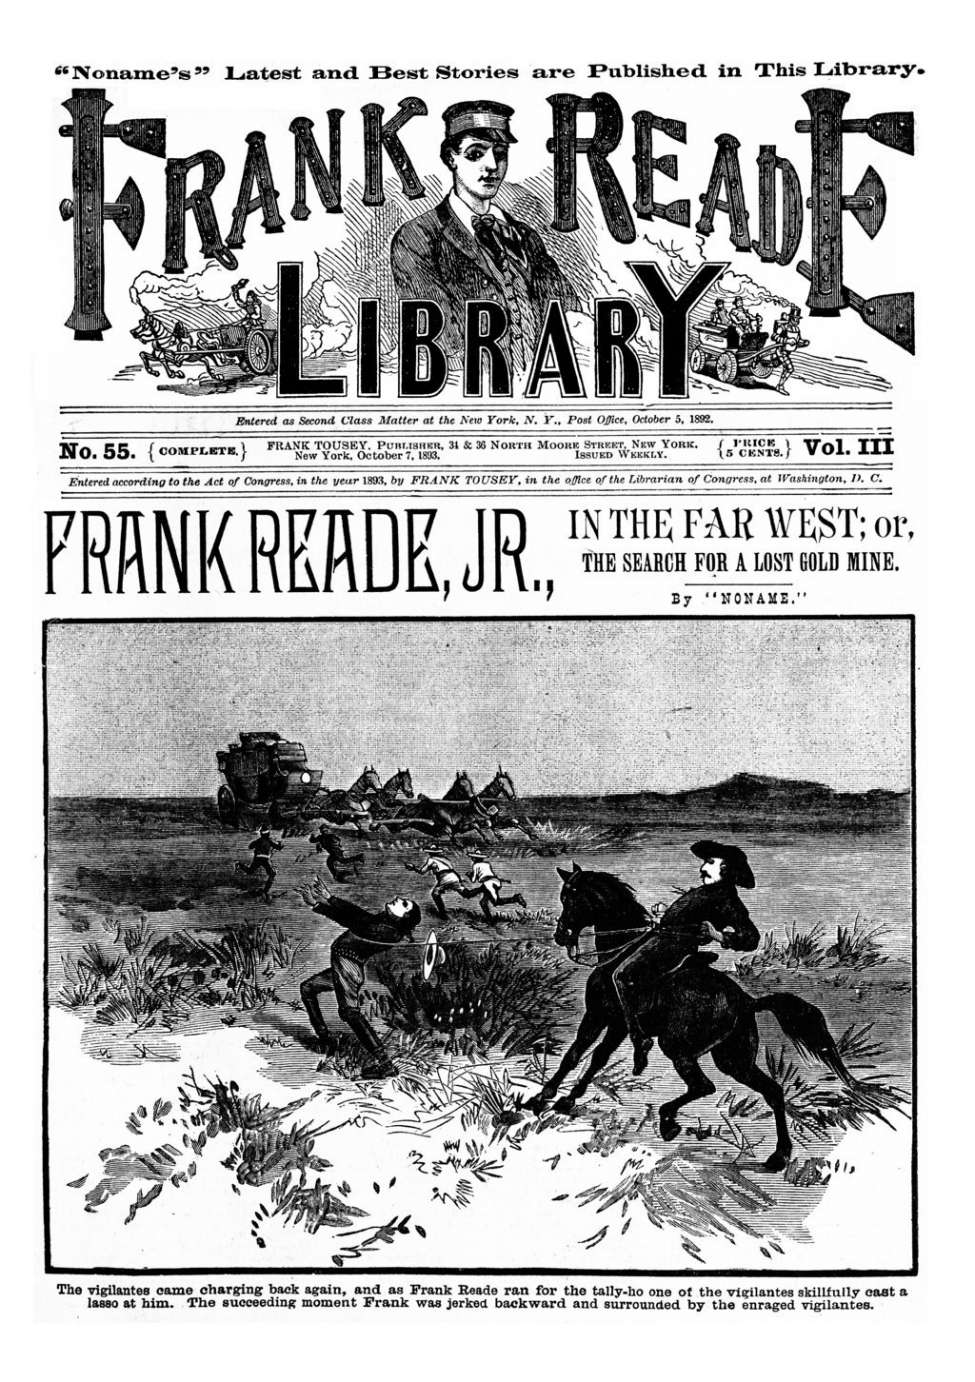 Book Cover For v03 55 - Frank Reade Jr. in the Far West